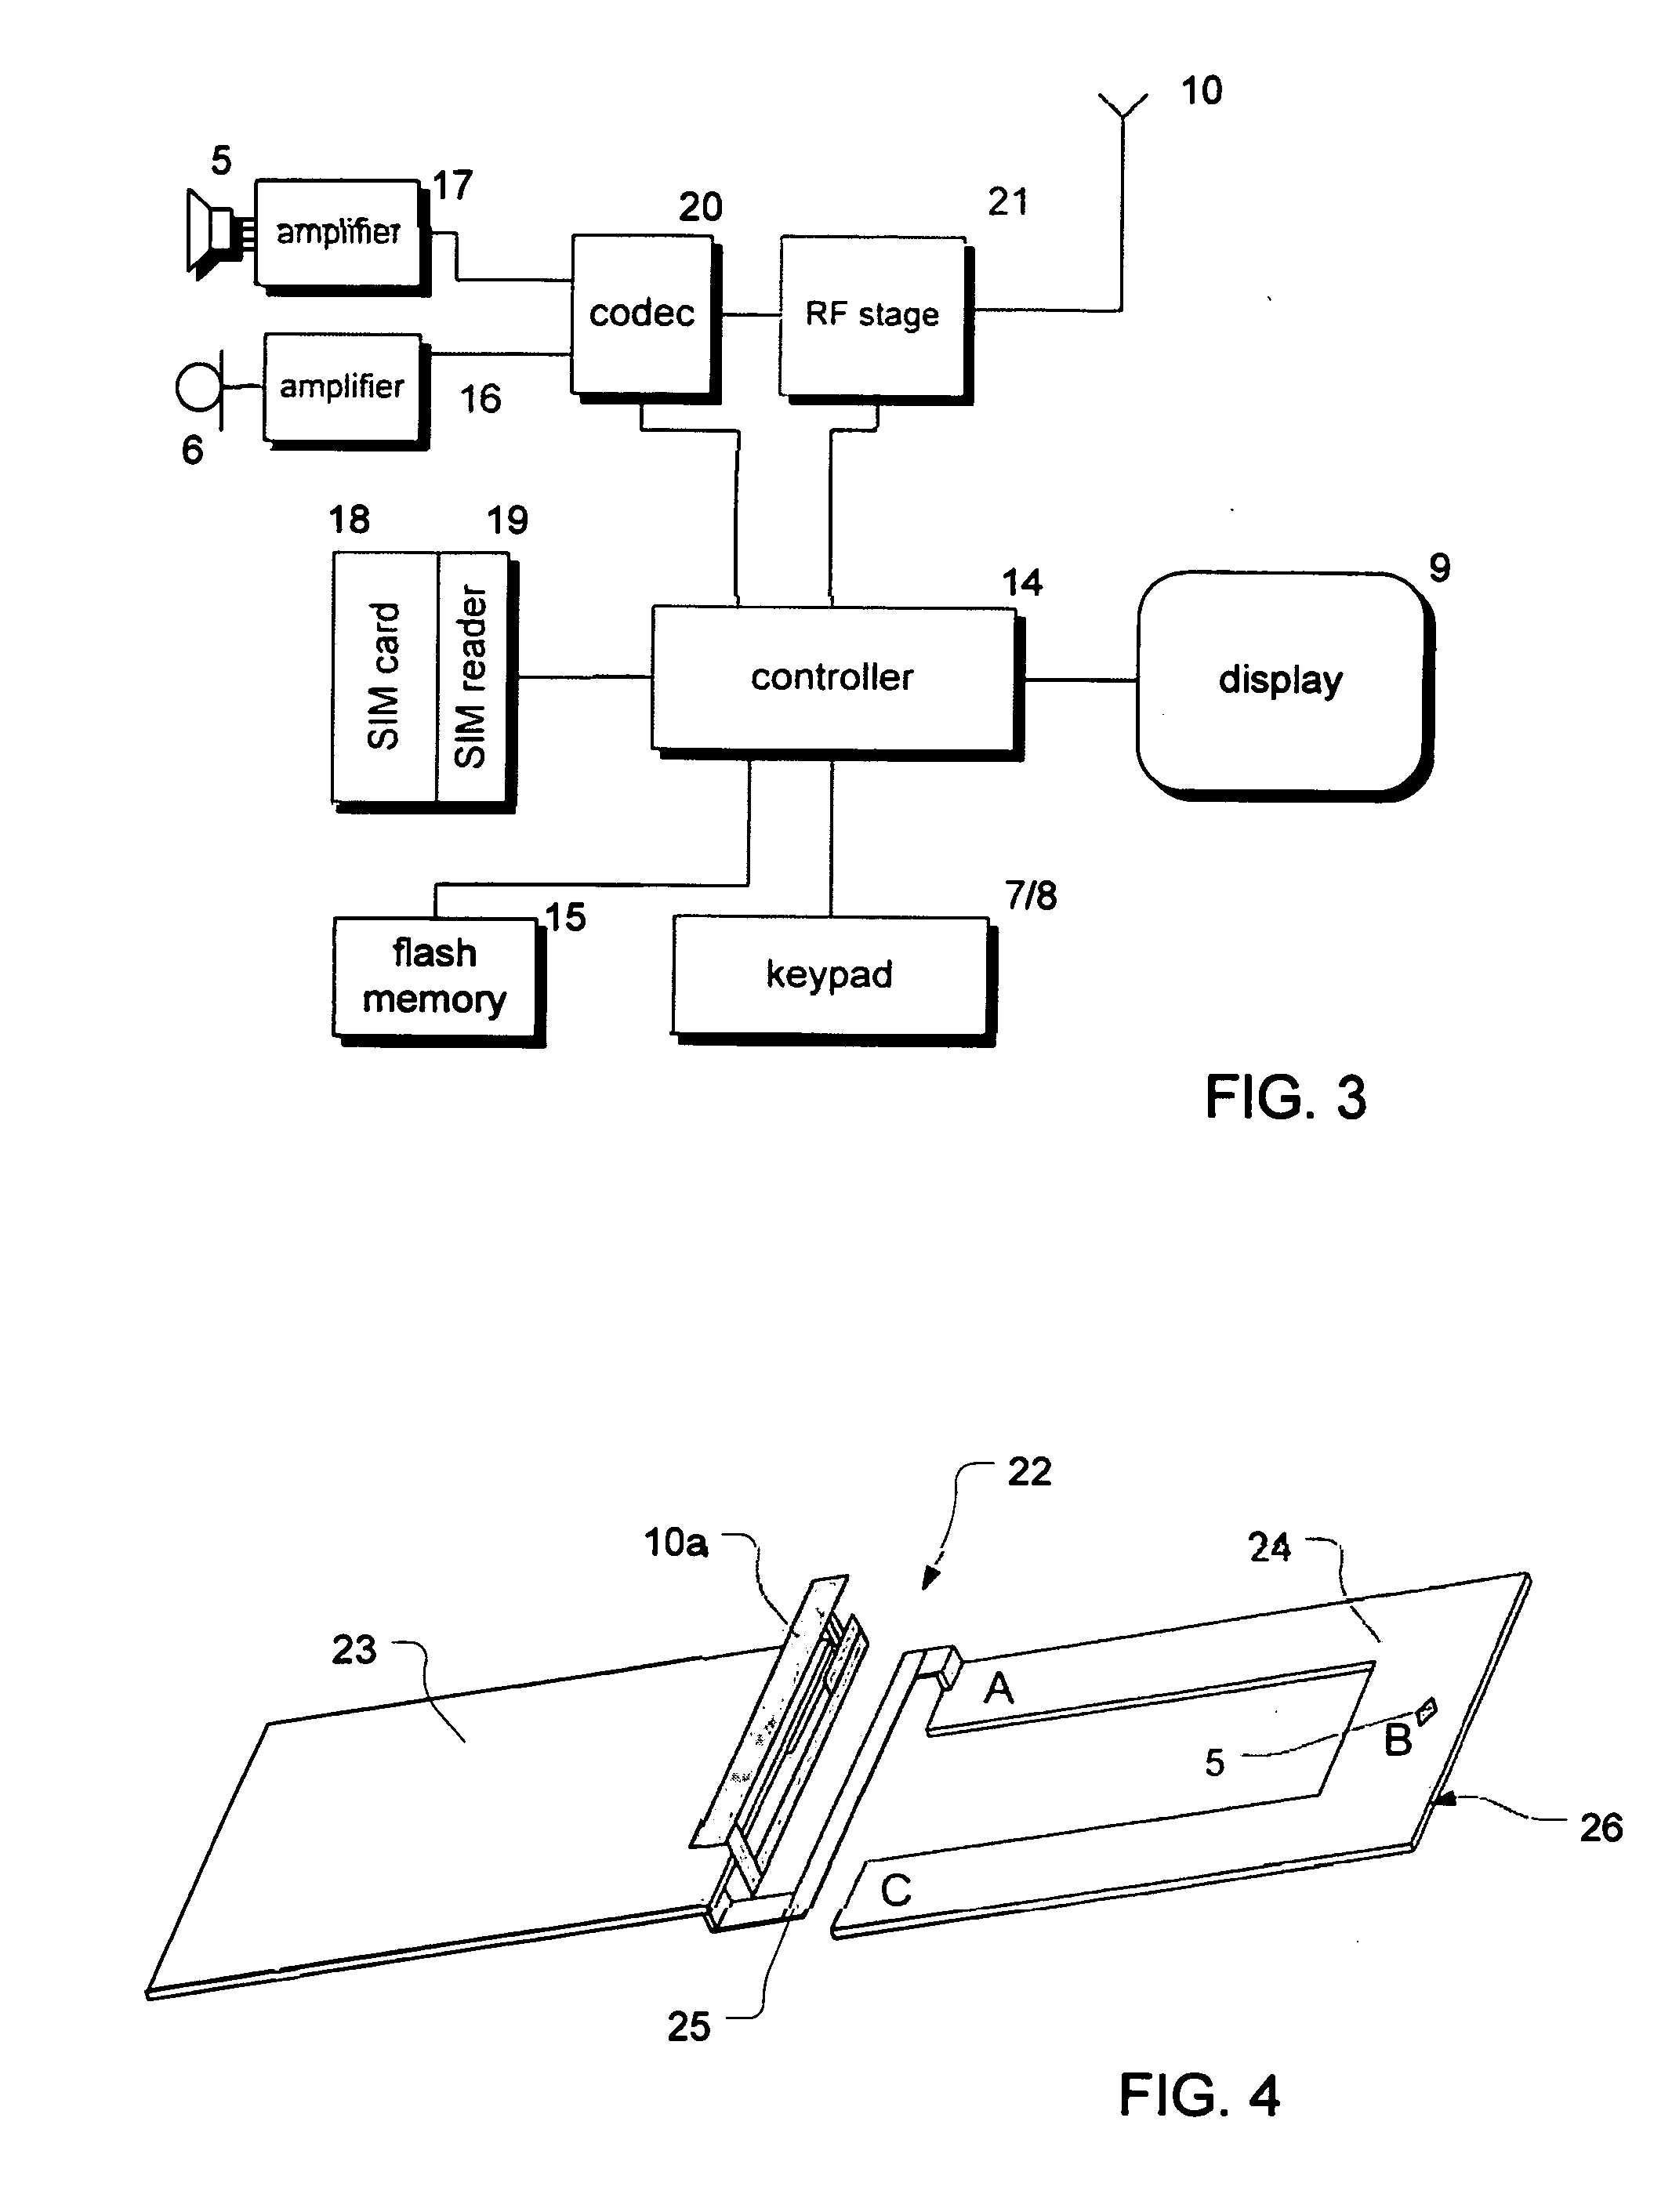 Mobile communication device with reduced electric field emission levels near the earpiece